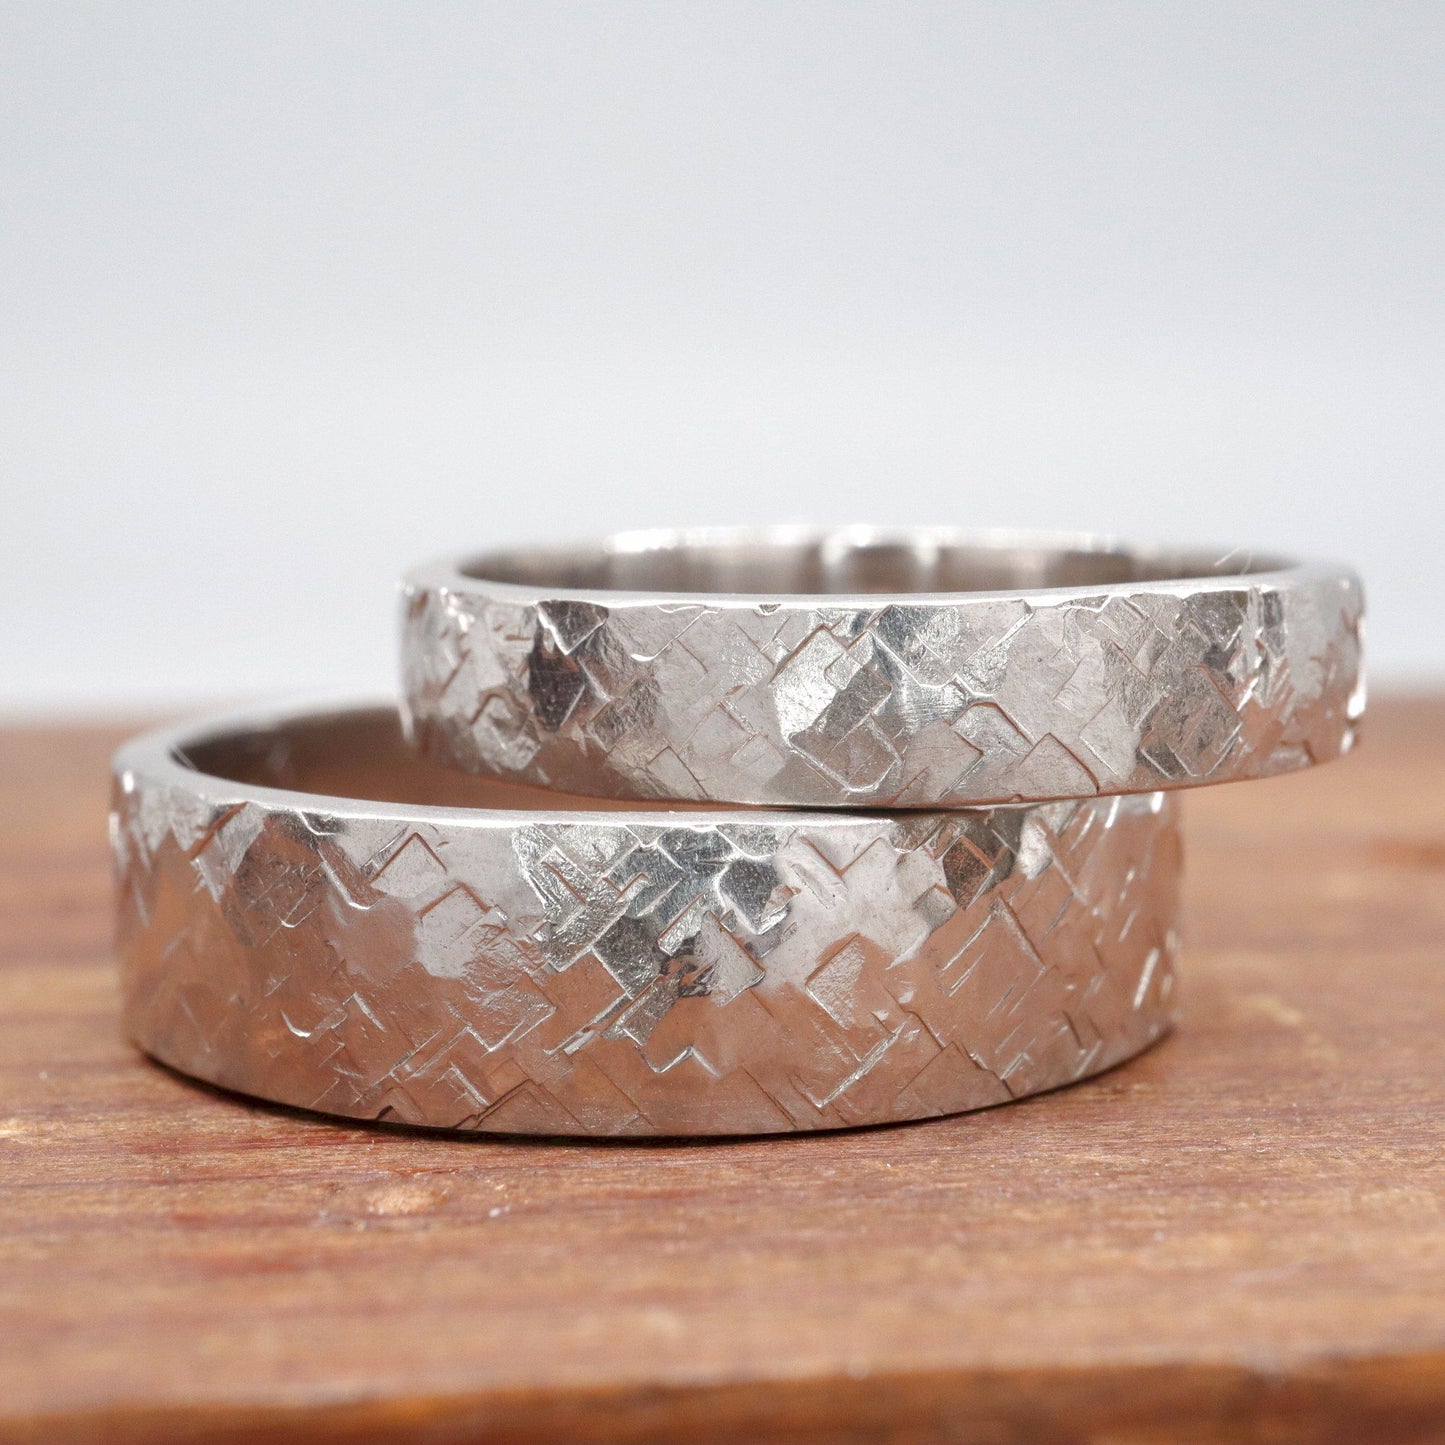 White gold matching Kendal design rustic hammered wedding ring set - flat textured 4mm and 6mm men and womens rings.